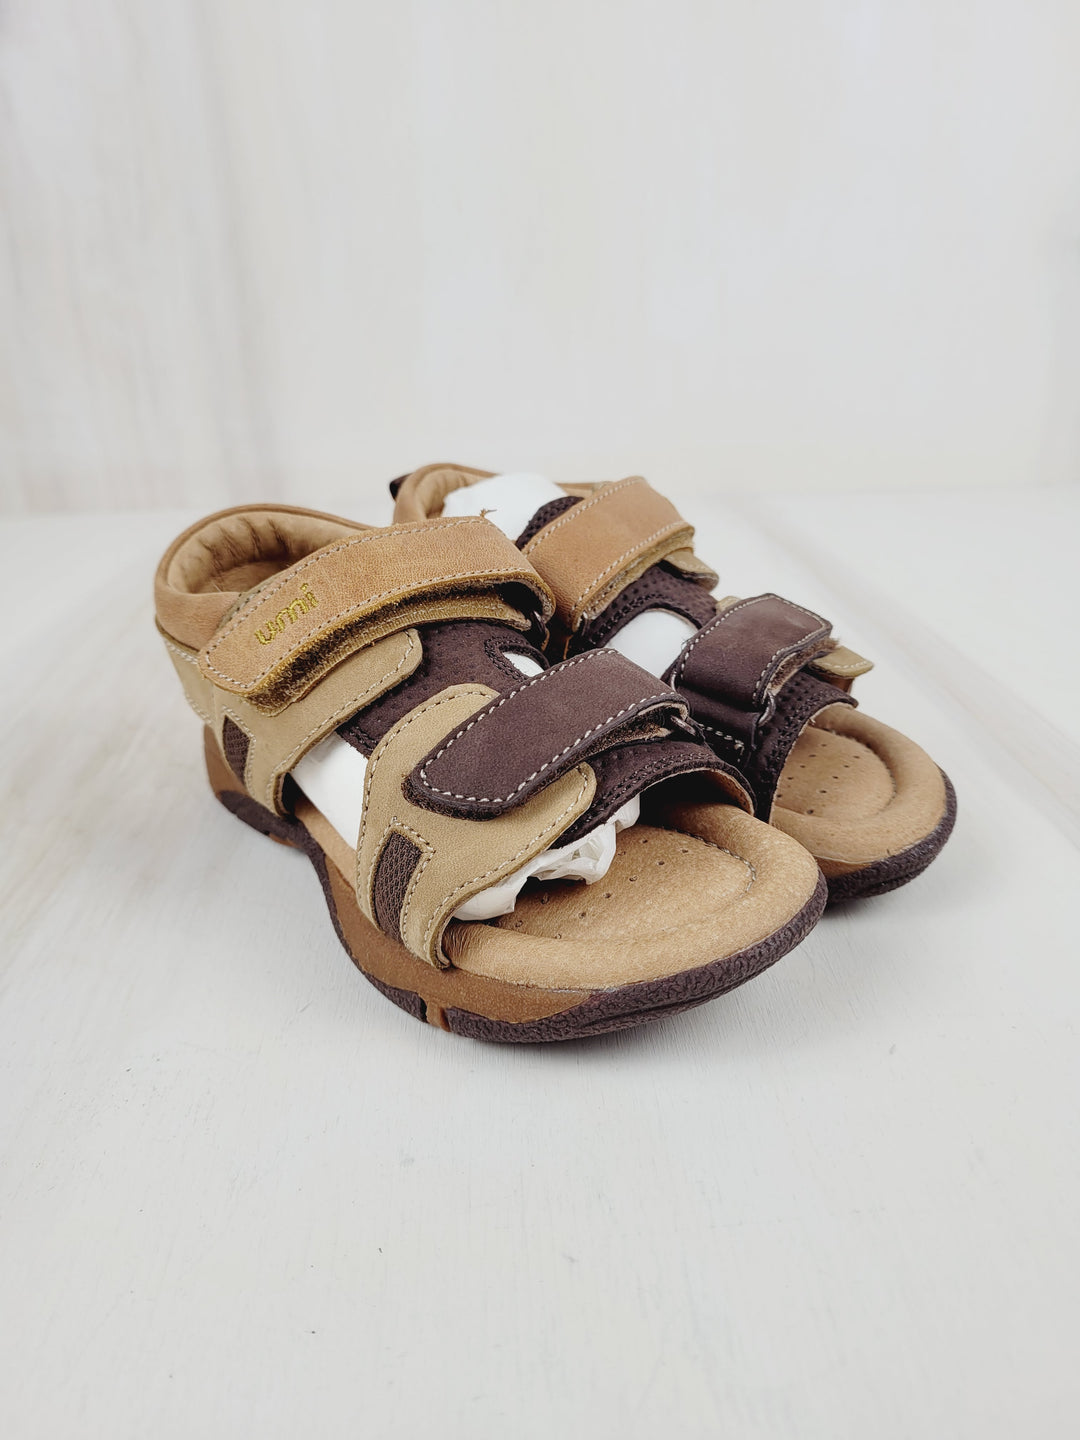 UMI LEATHER SANDALS KIDS SIZE 10 NEW!